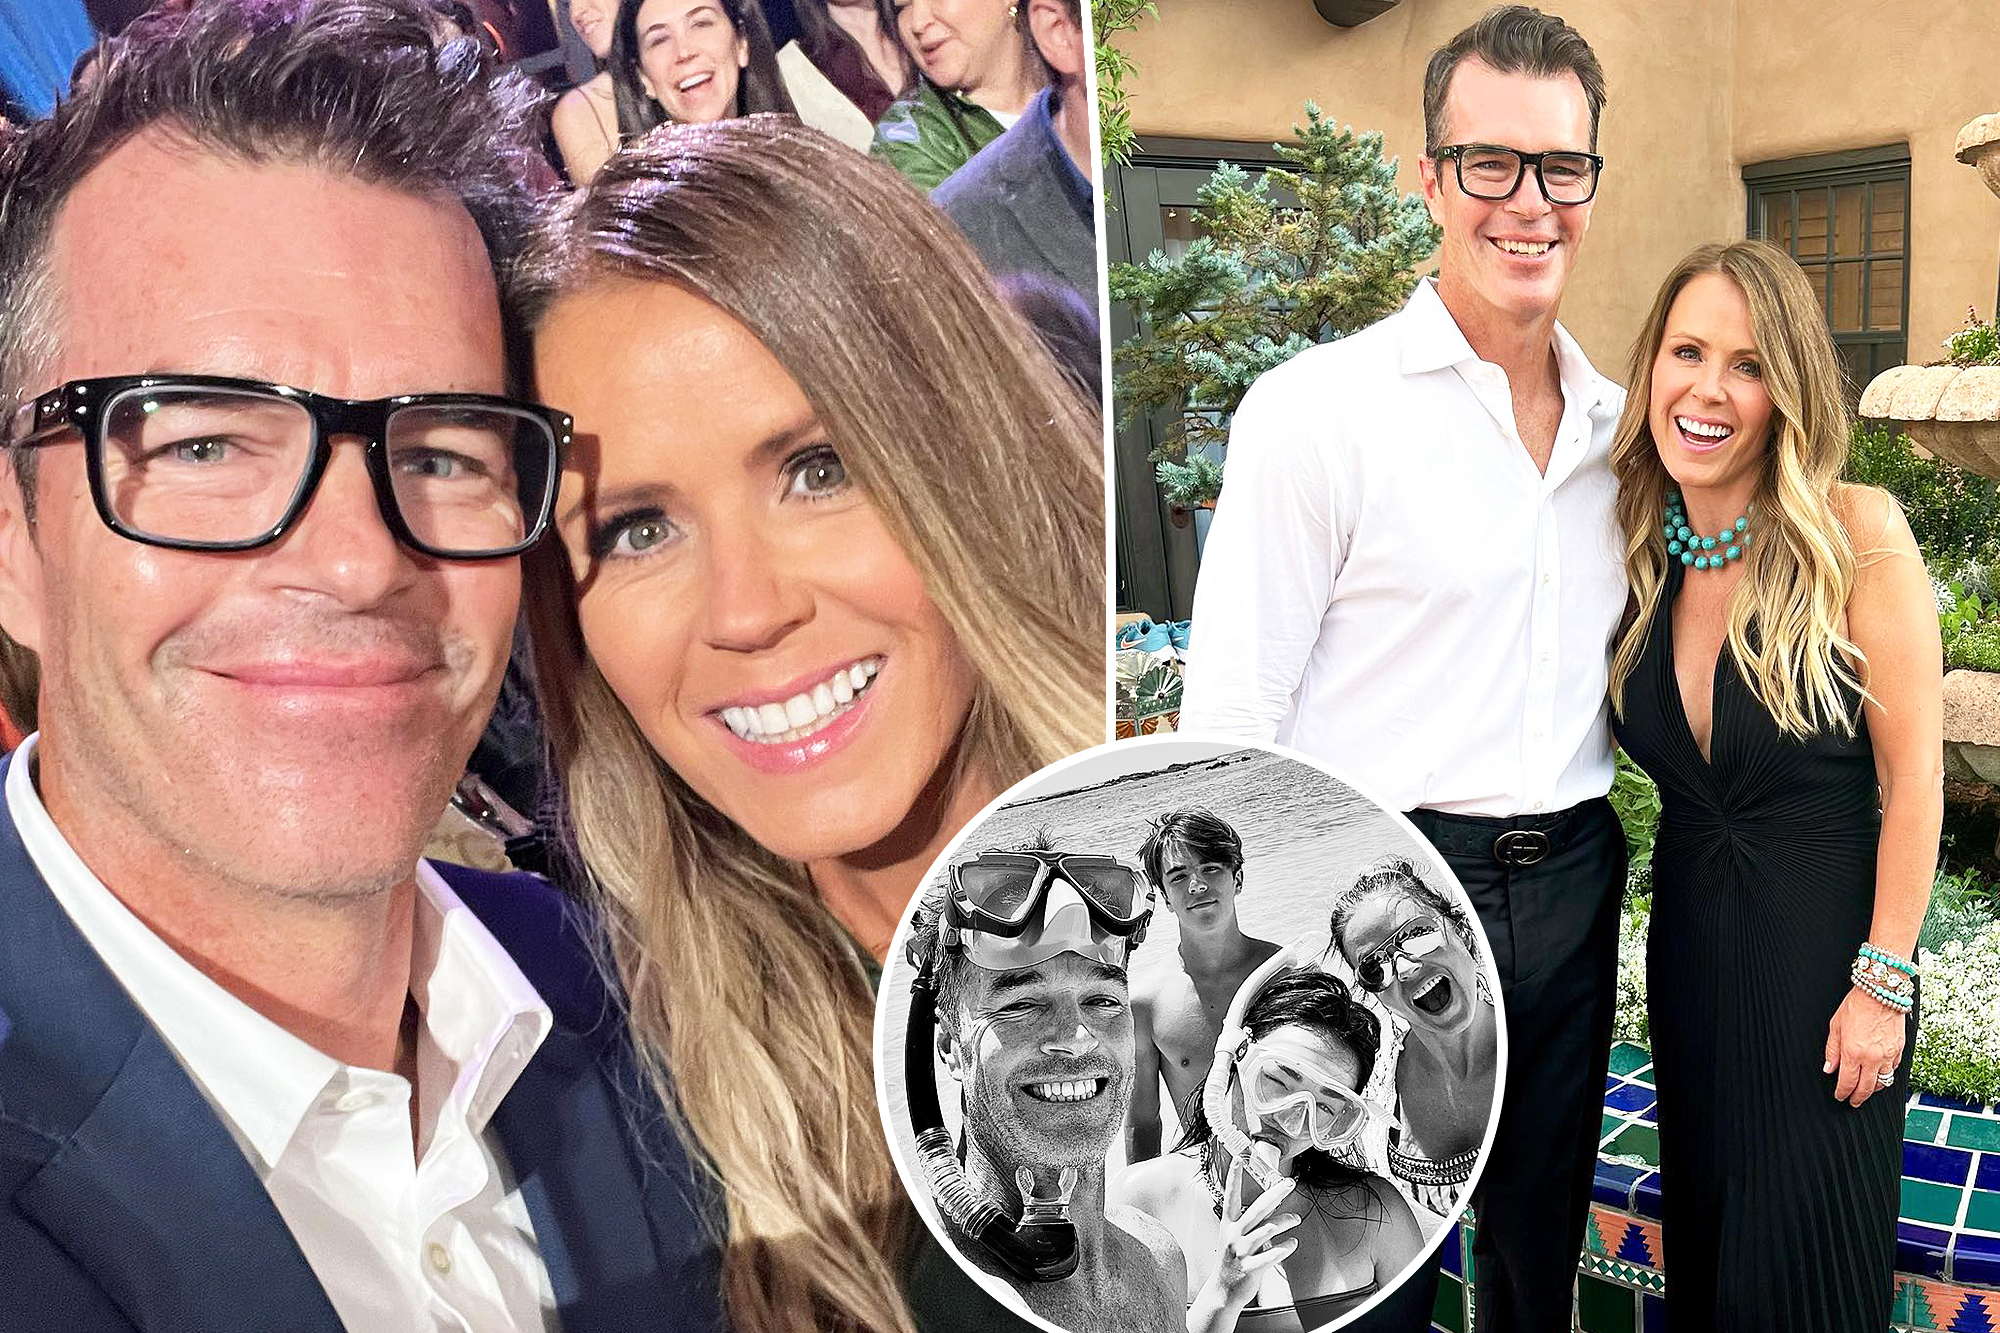 Ryan Sutter Shares Heartfelt Reunion with Wife Trista After Time Apart